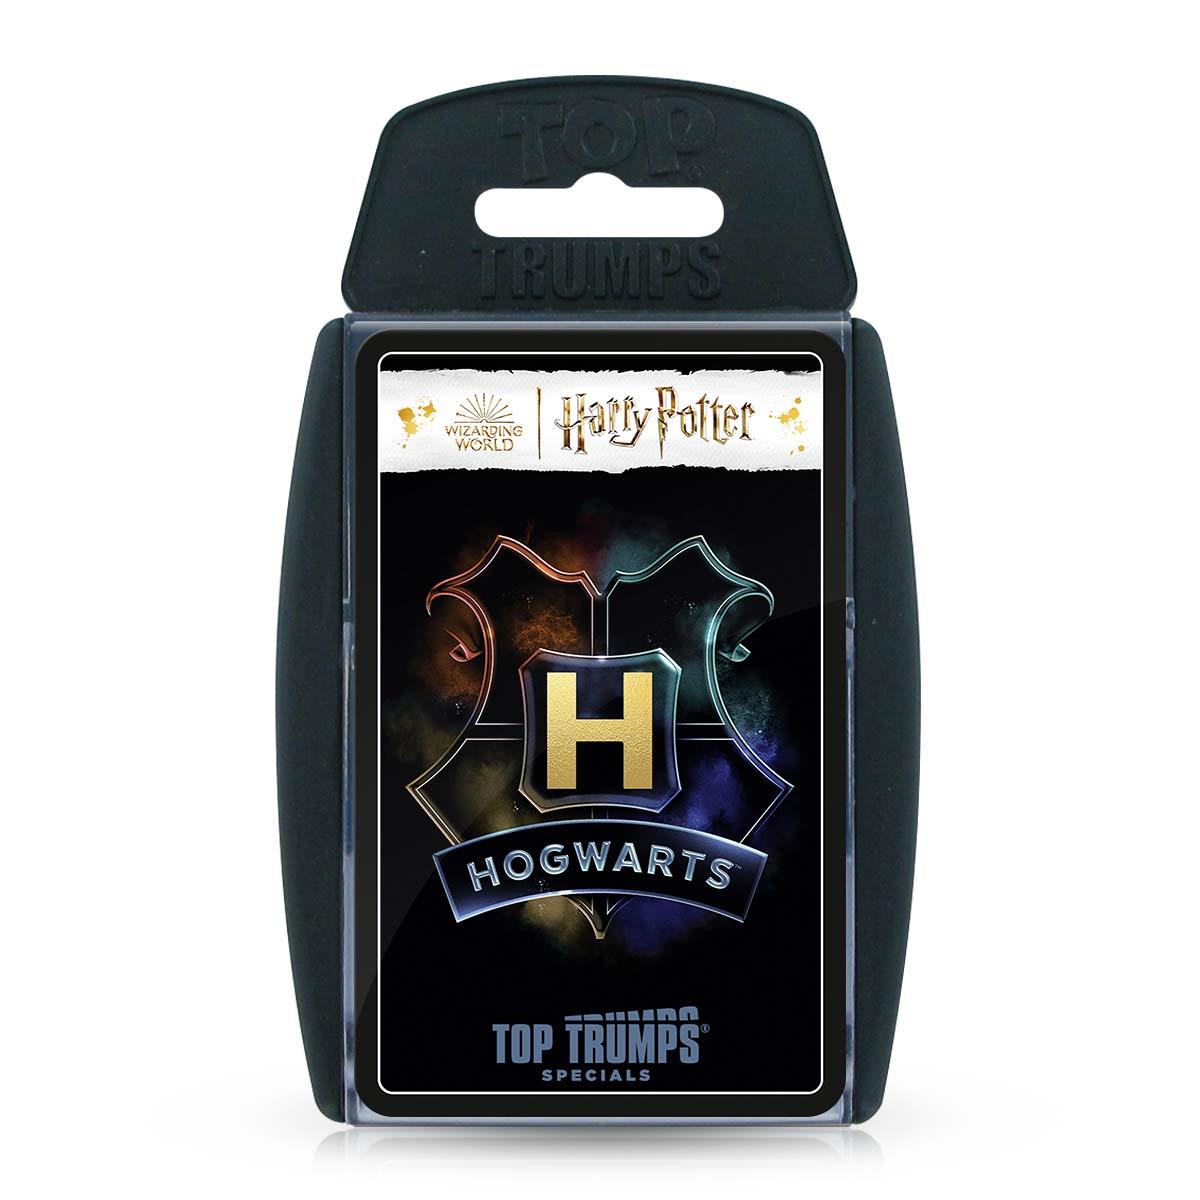 Harry Potter Heroes of Hogwarts Top Trumps Card Game